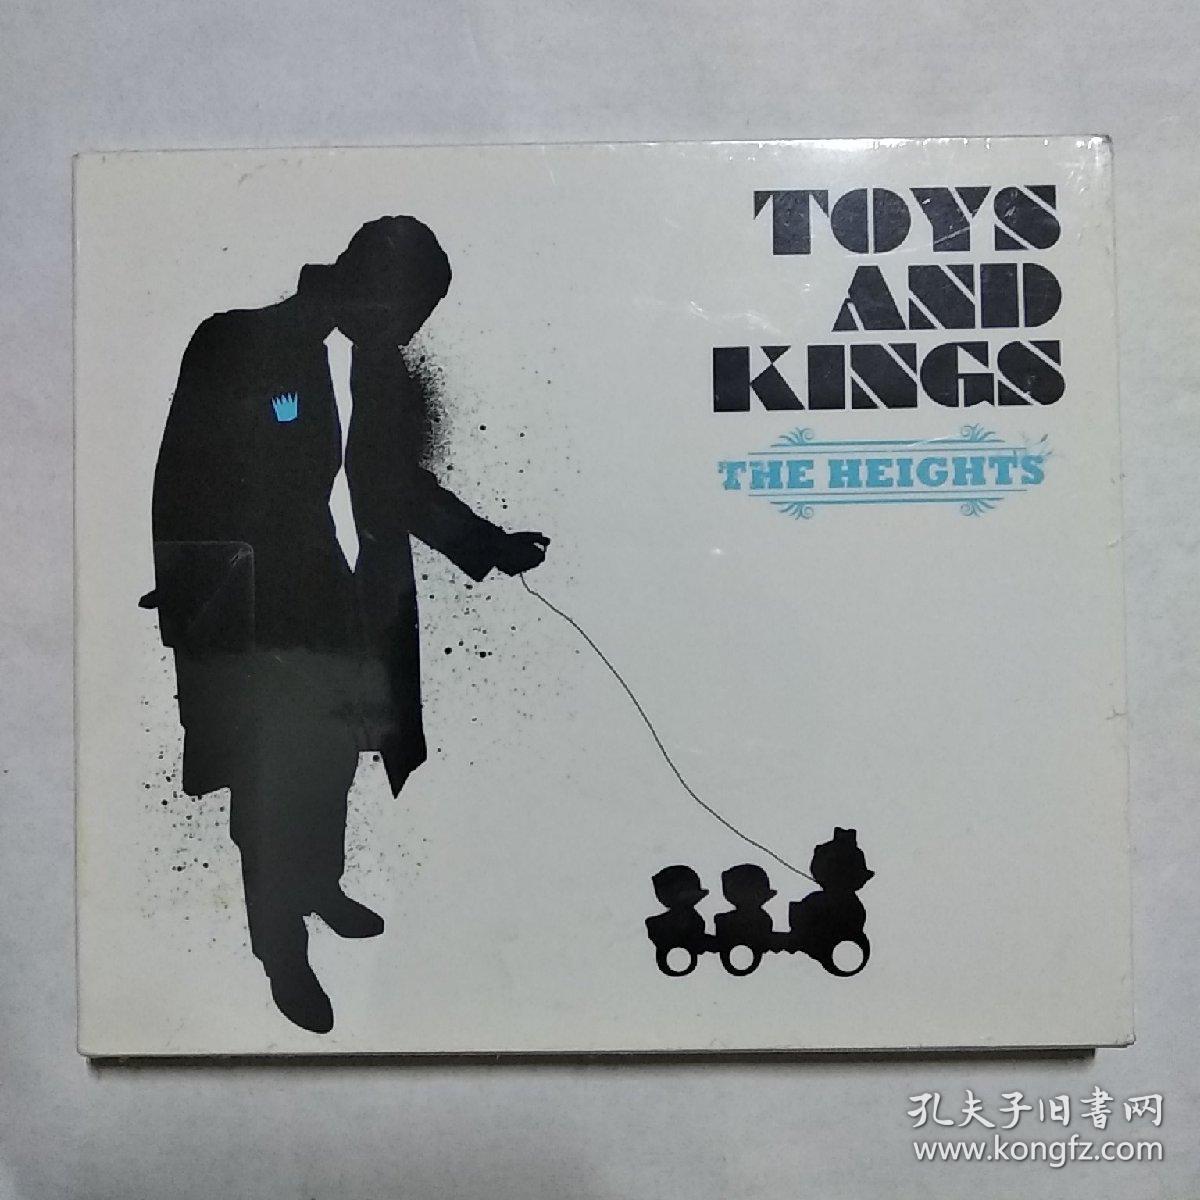 TOYS AND KINGS THE HEIGHTS 原版原封CD